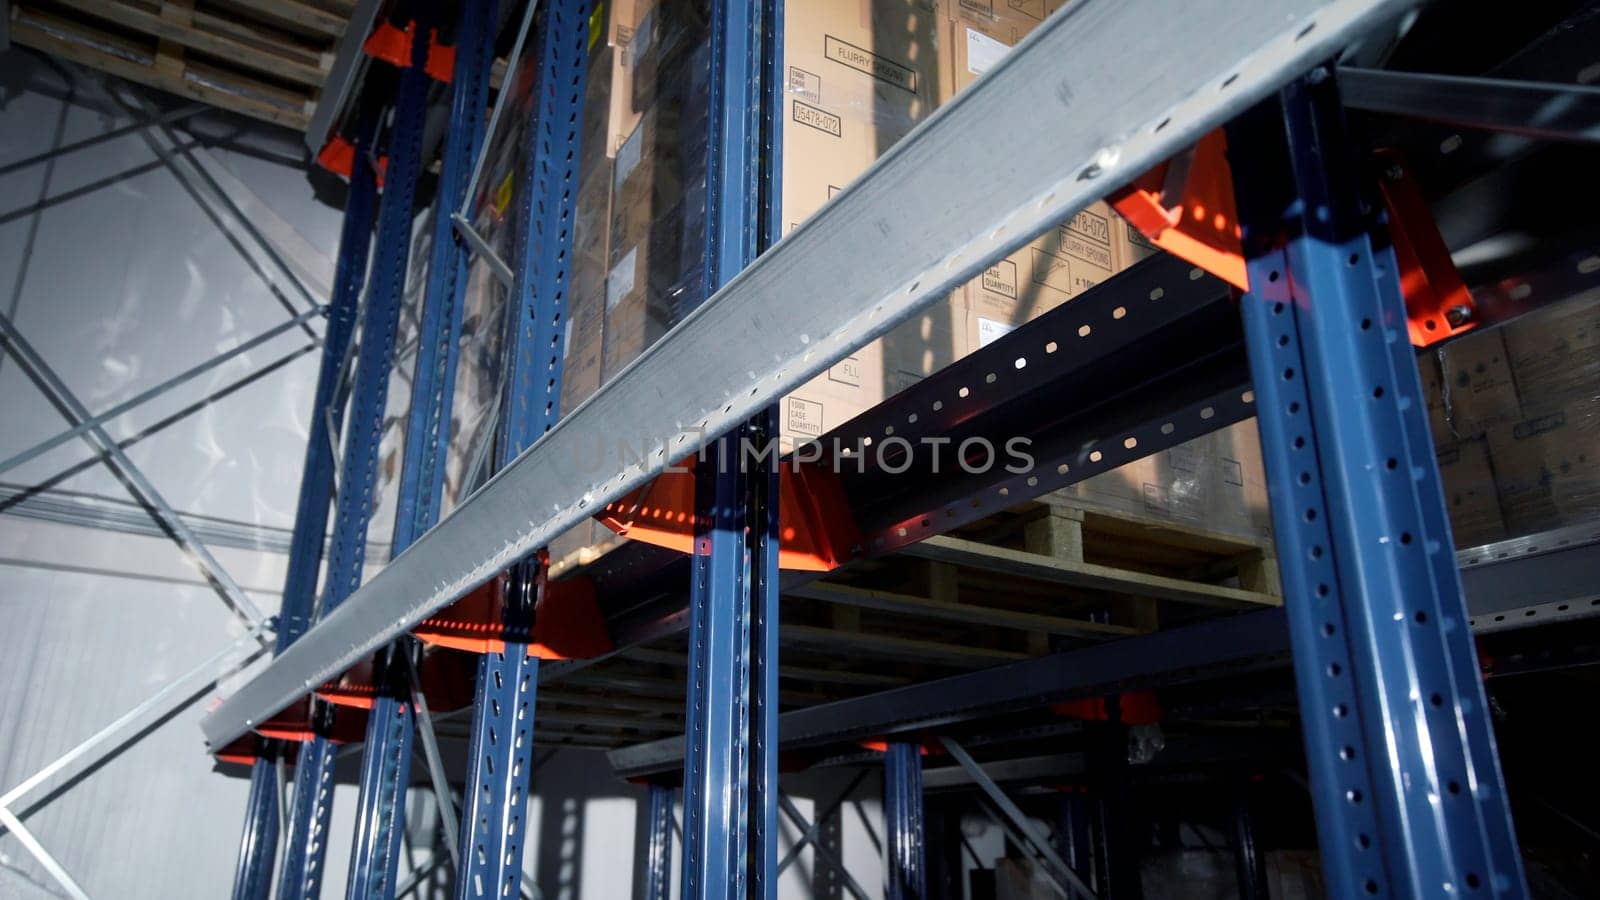 Moscow - Russia, 04.20.2022: Warehouse materials and metal shelves with goods inside cardbox boxes. Creative. The camera moves among the shelves with different boxes. by Mediawhalestock